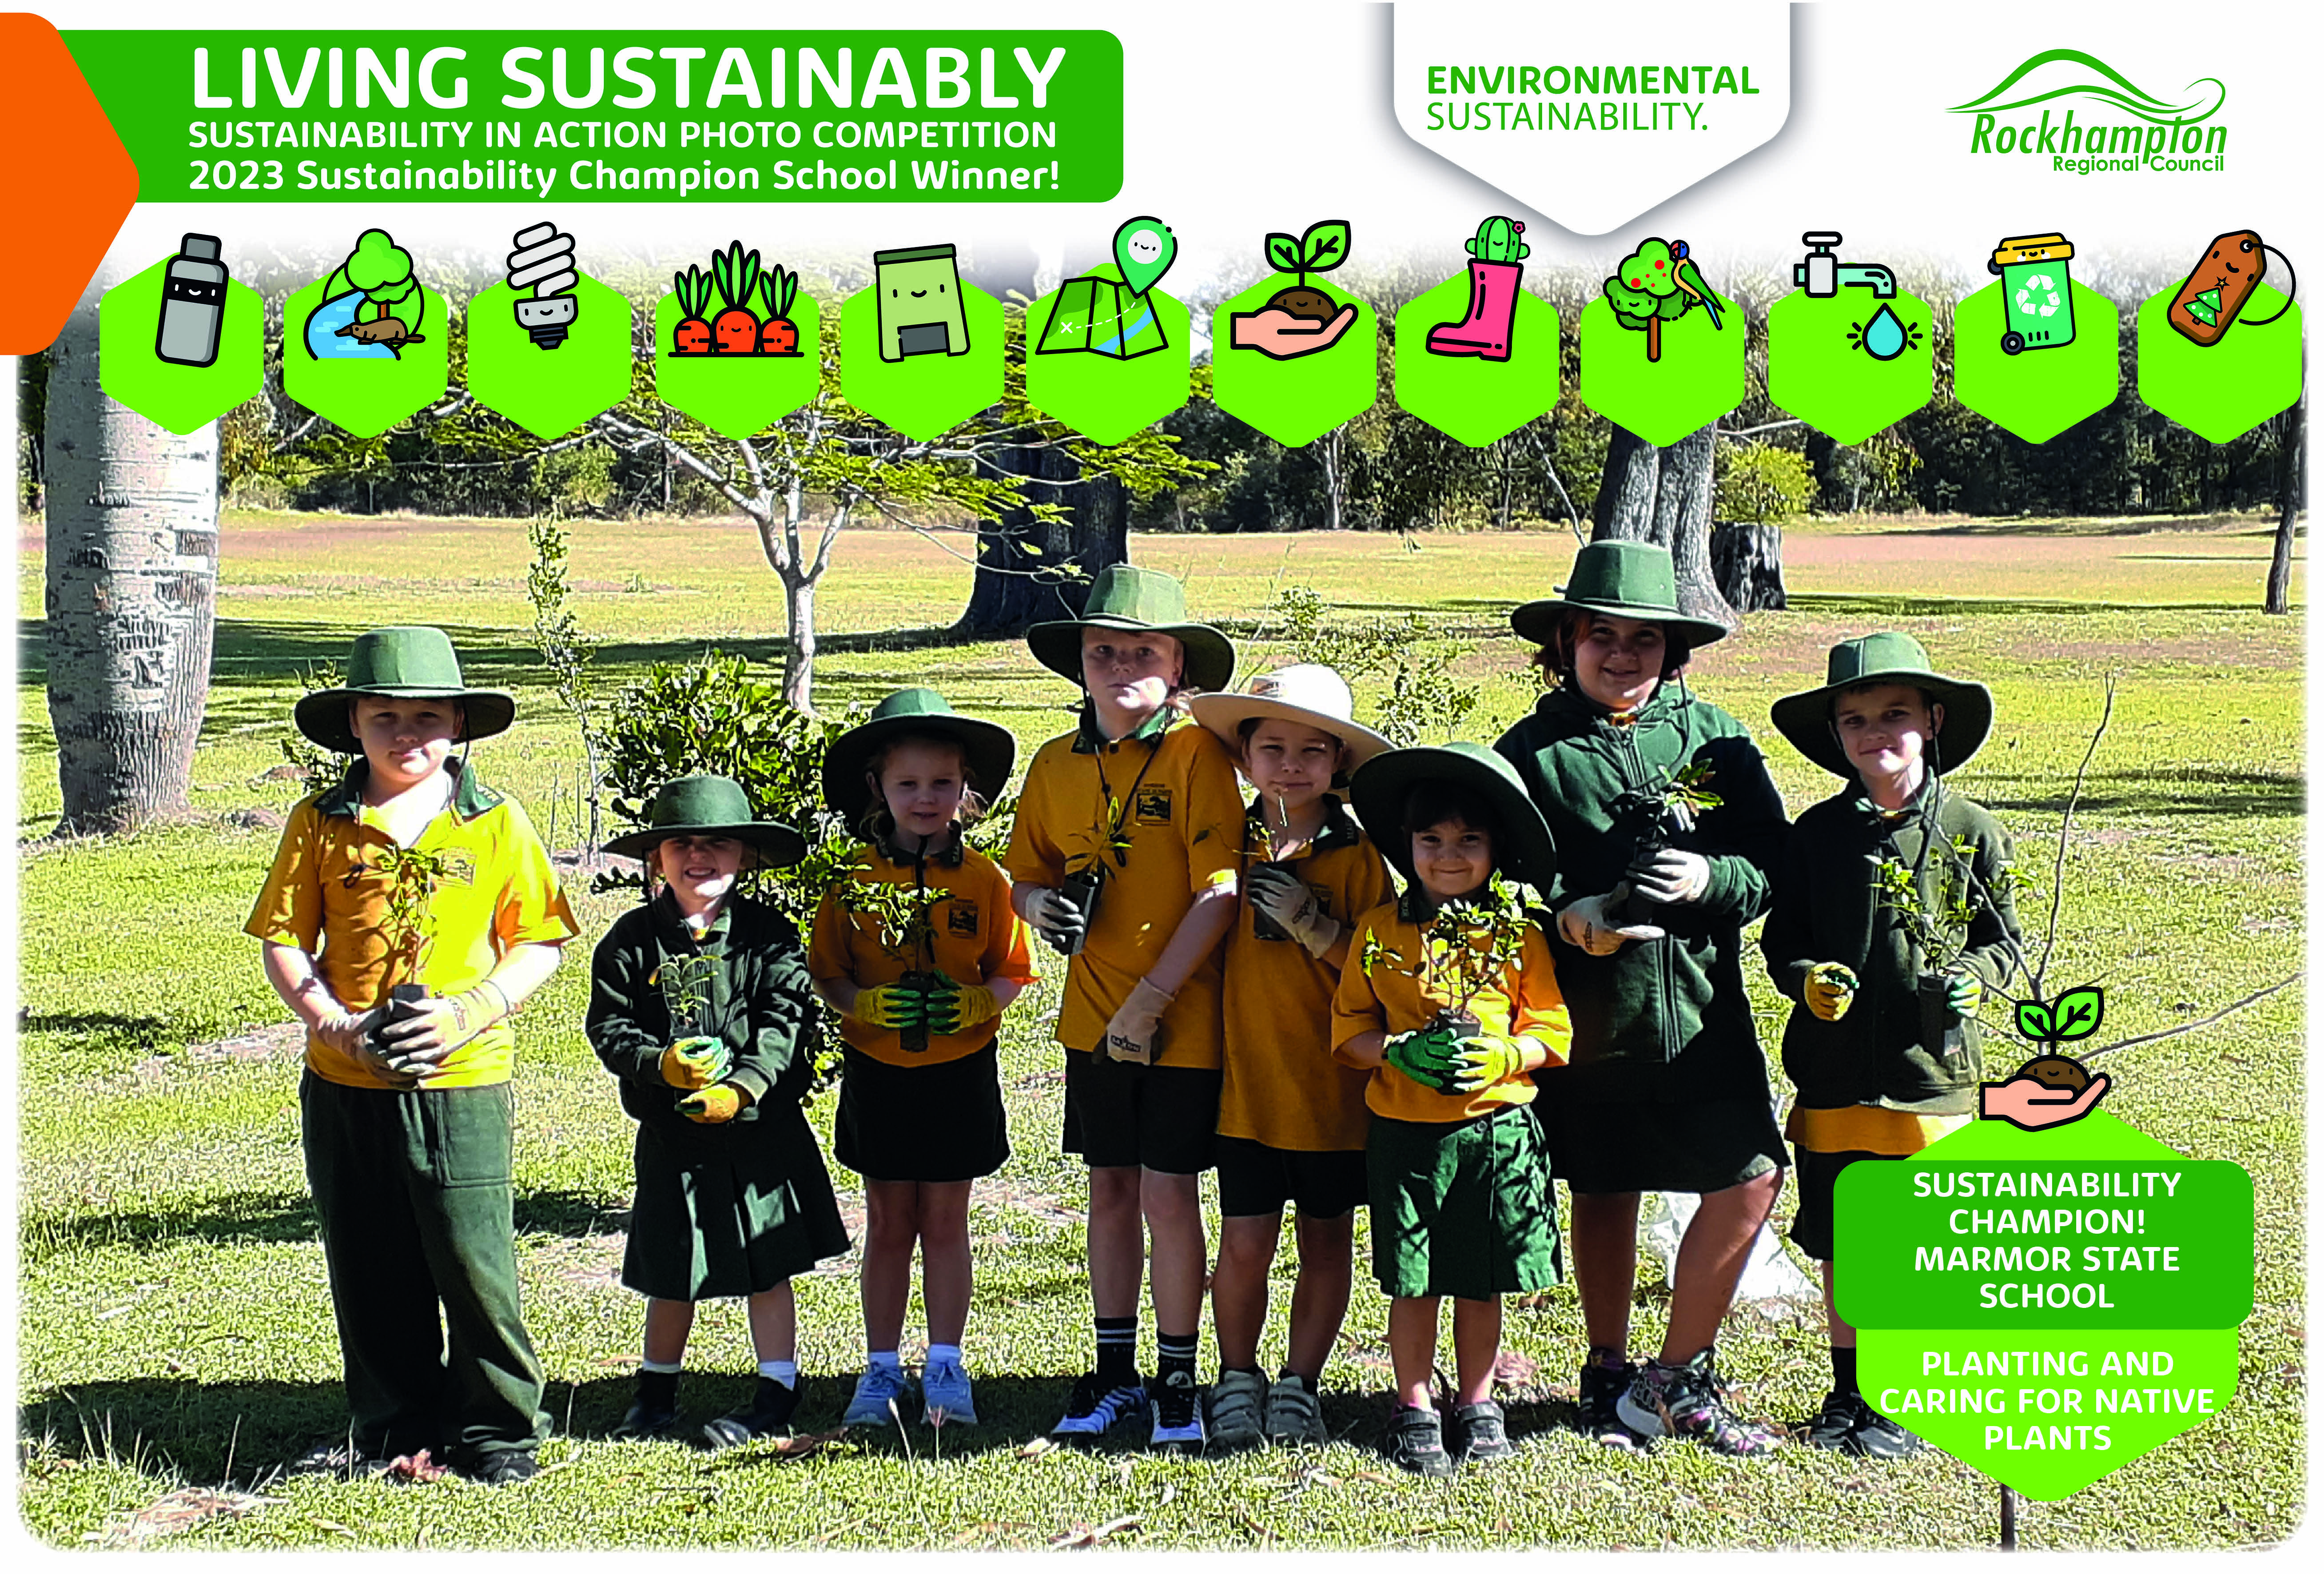 2023-SCHOOL-Sustainability-in-Action-Photo-Comp-Marmor-State-School